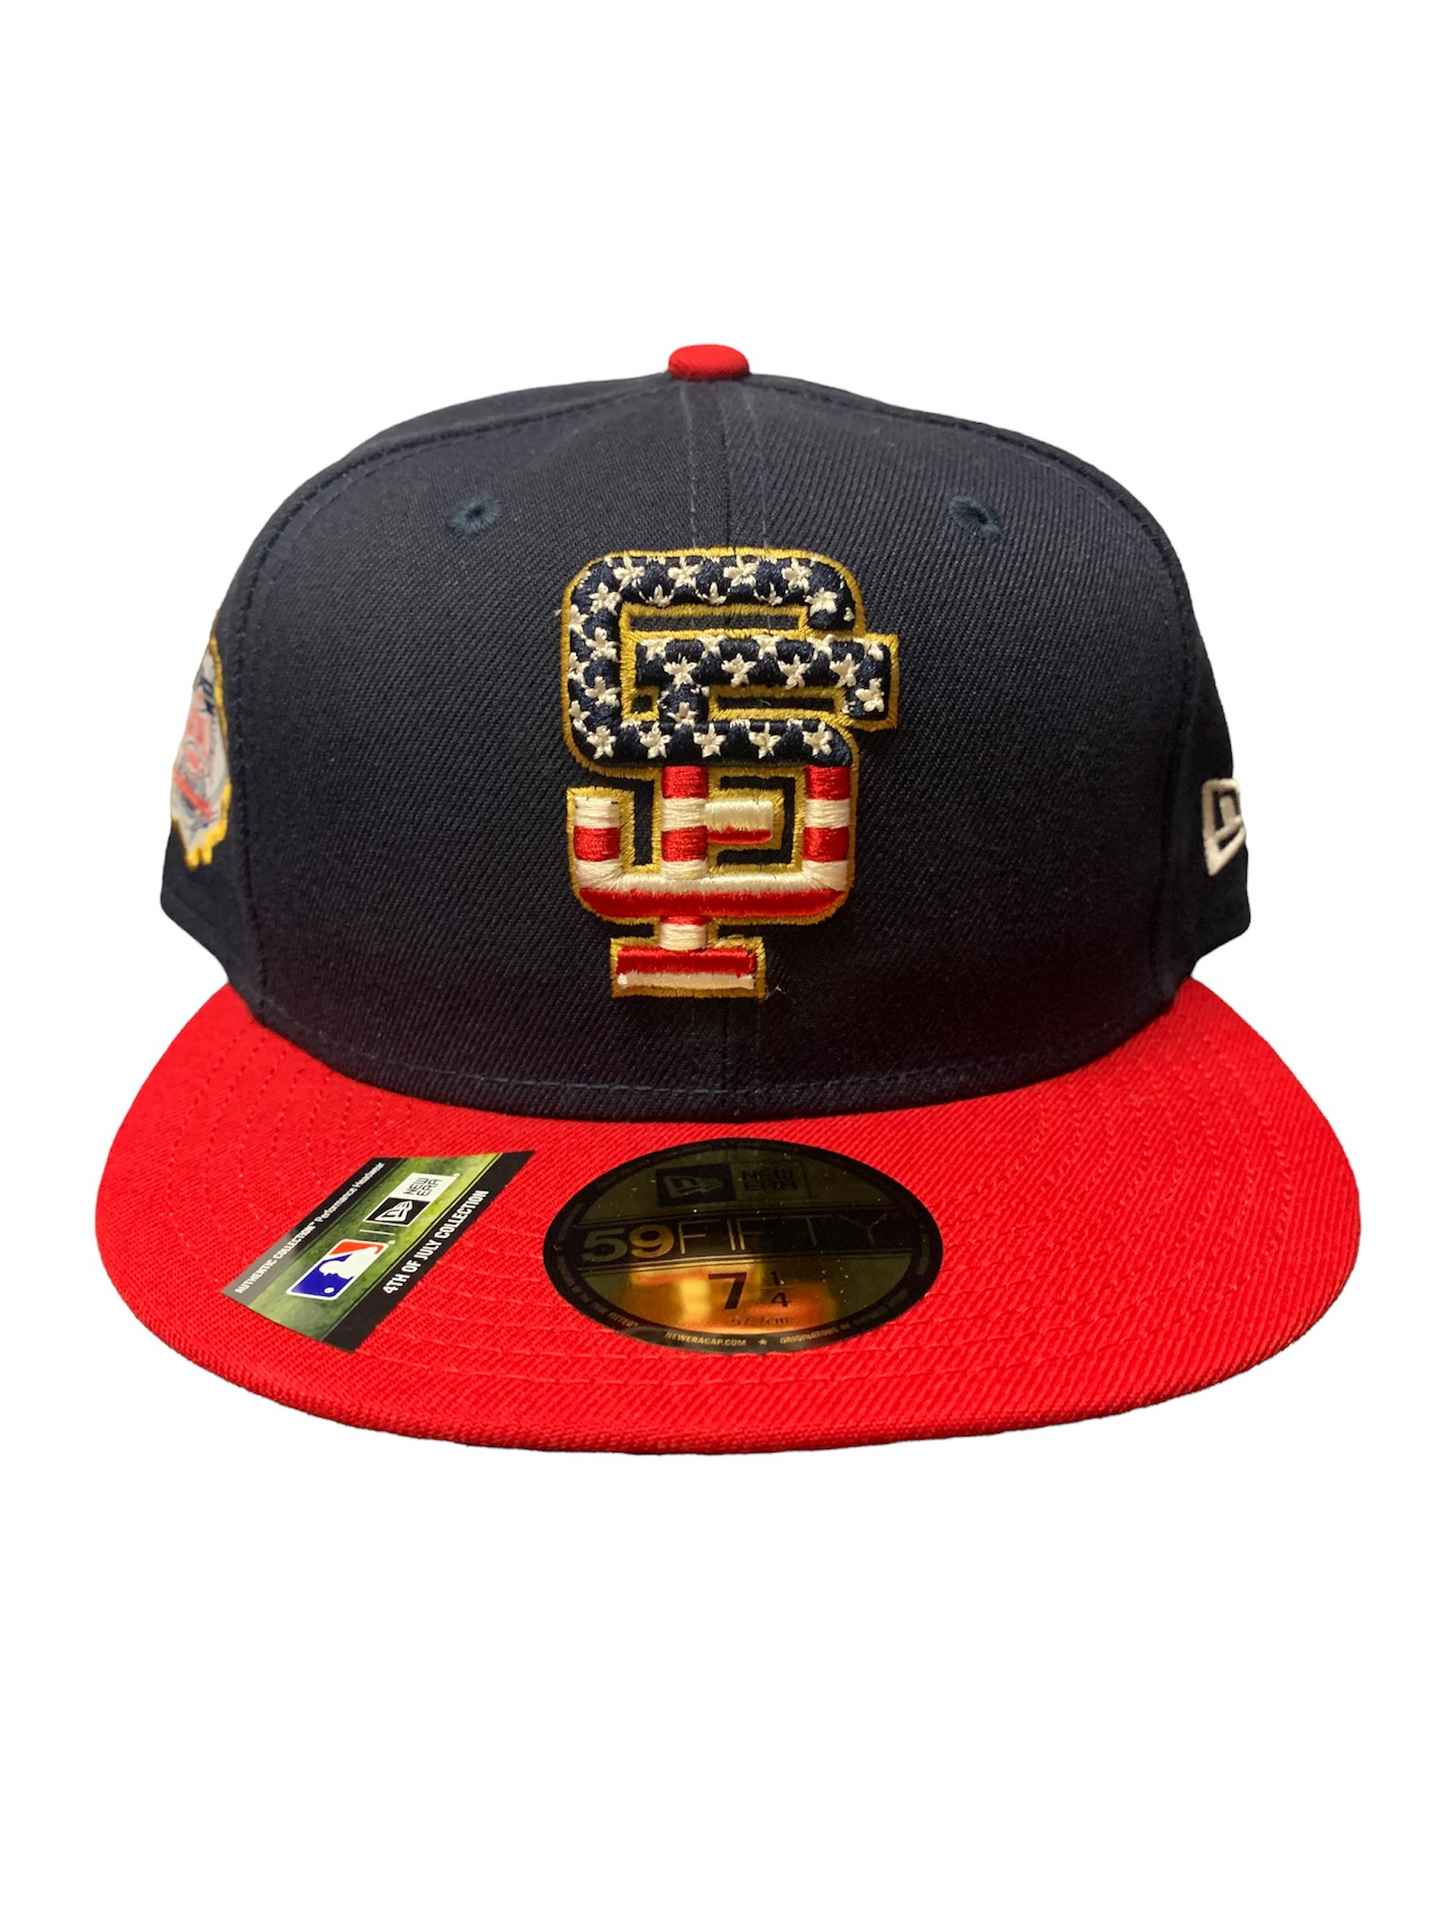 SAN FRANCISCO GIANTS 4TH OF JULY 5950 FITTED